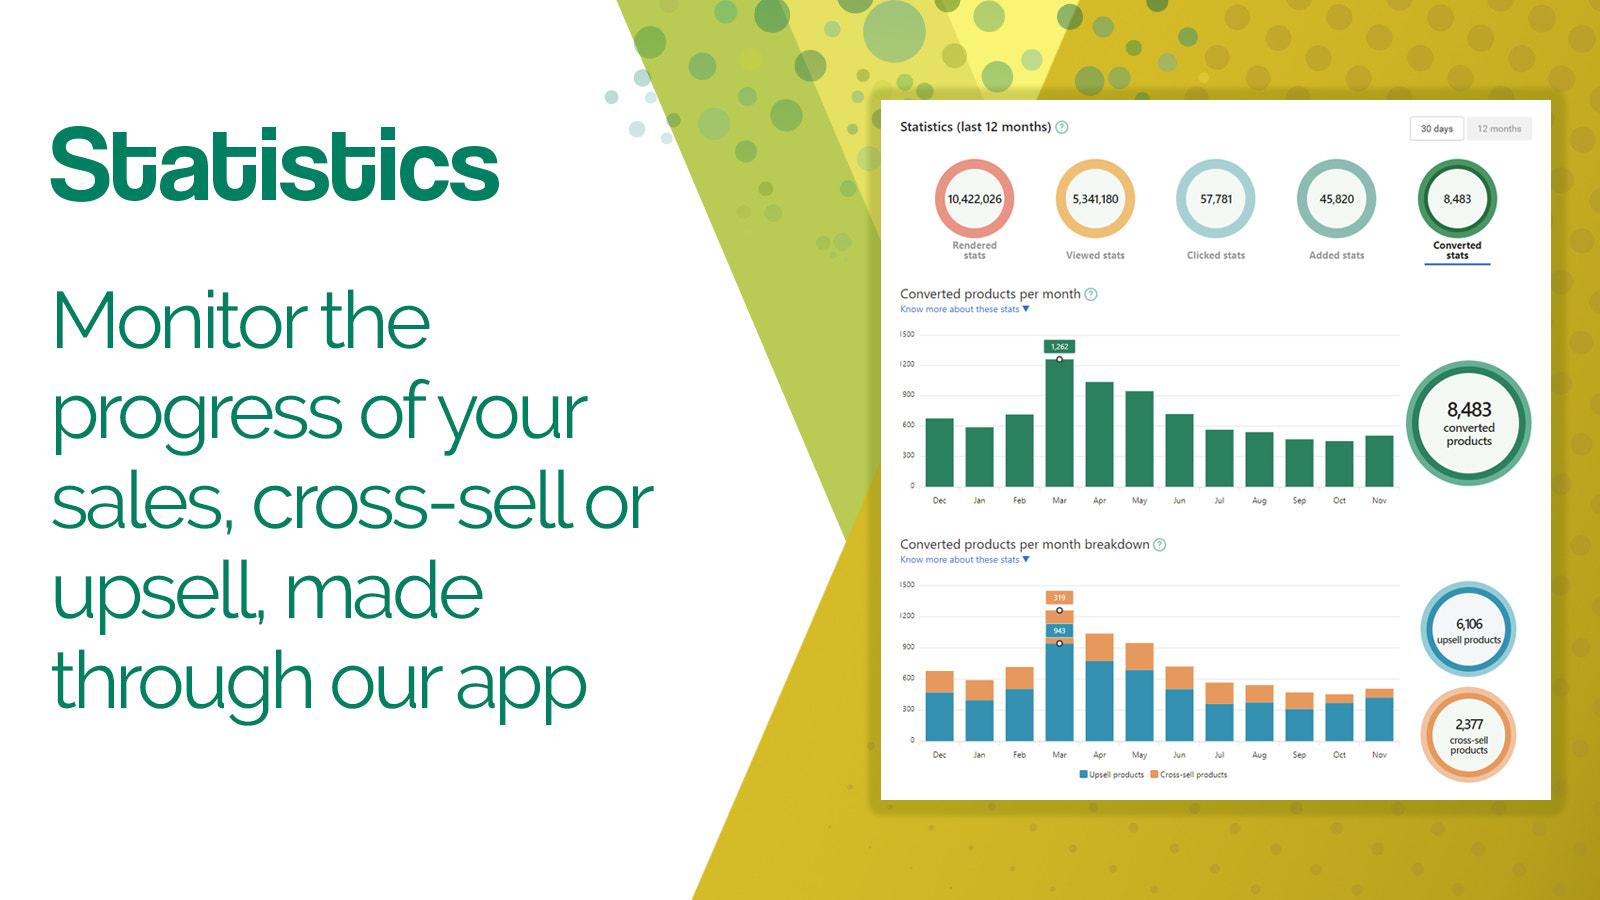 Monitor the progress of your sales made through the app